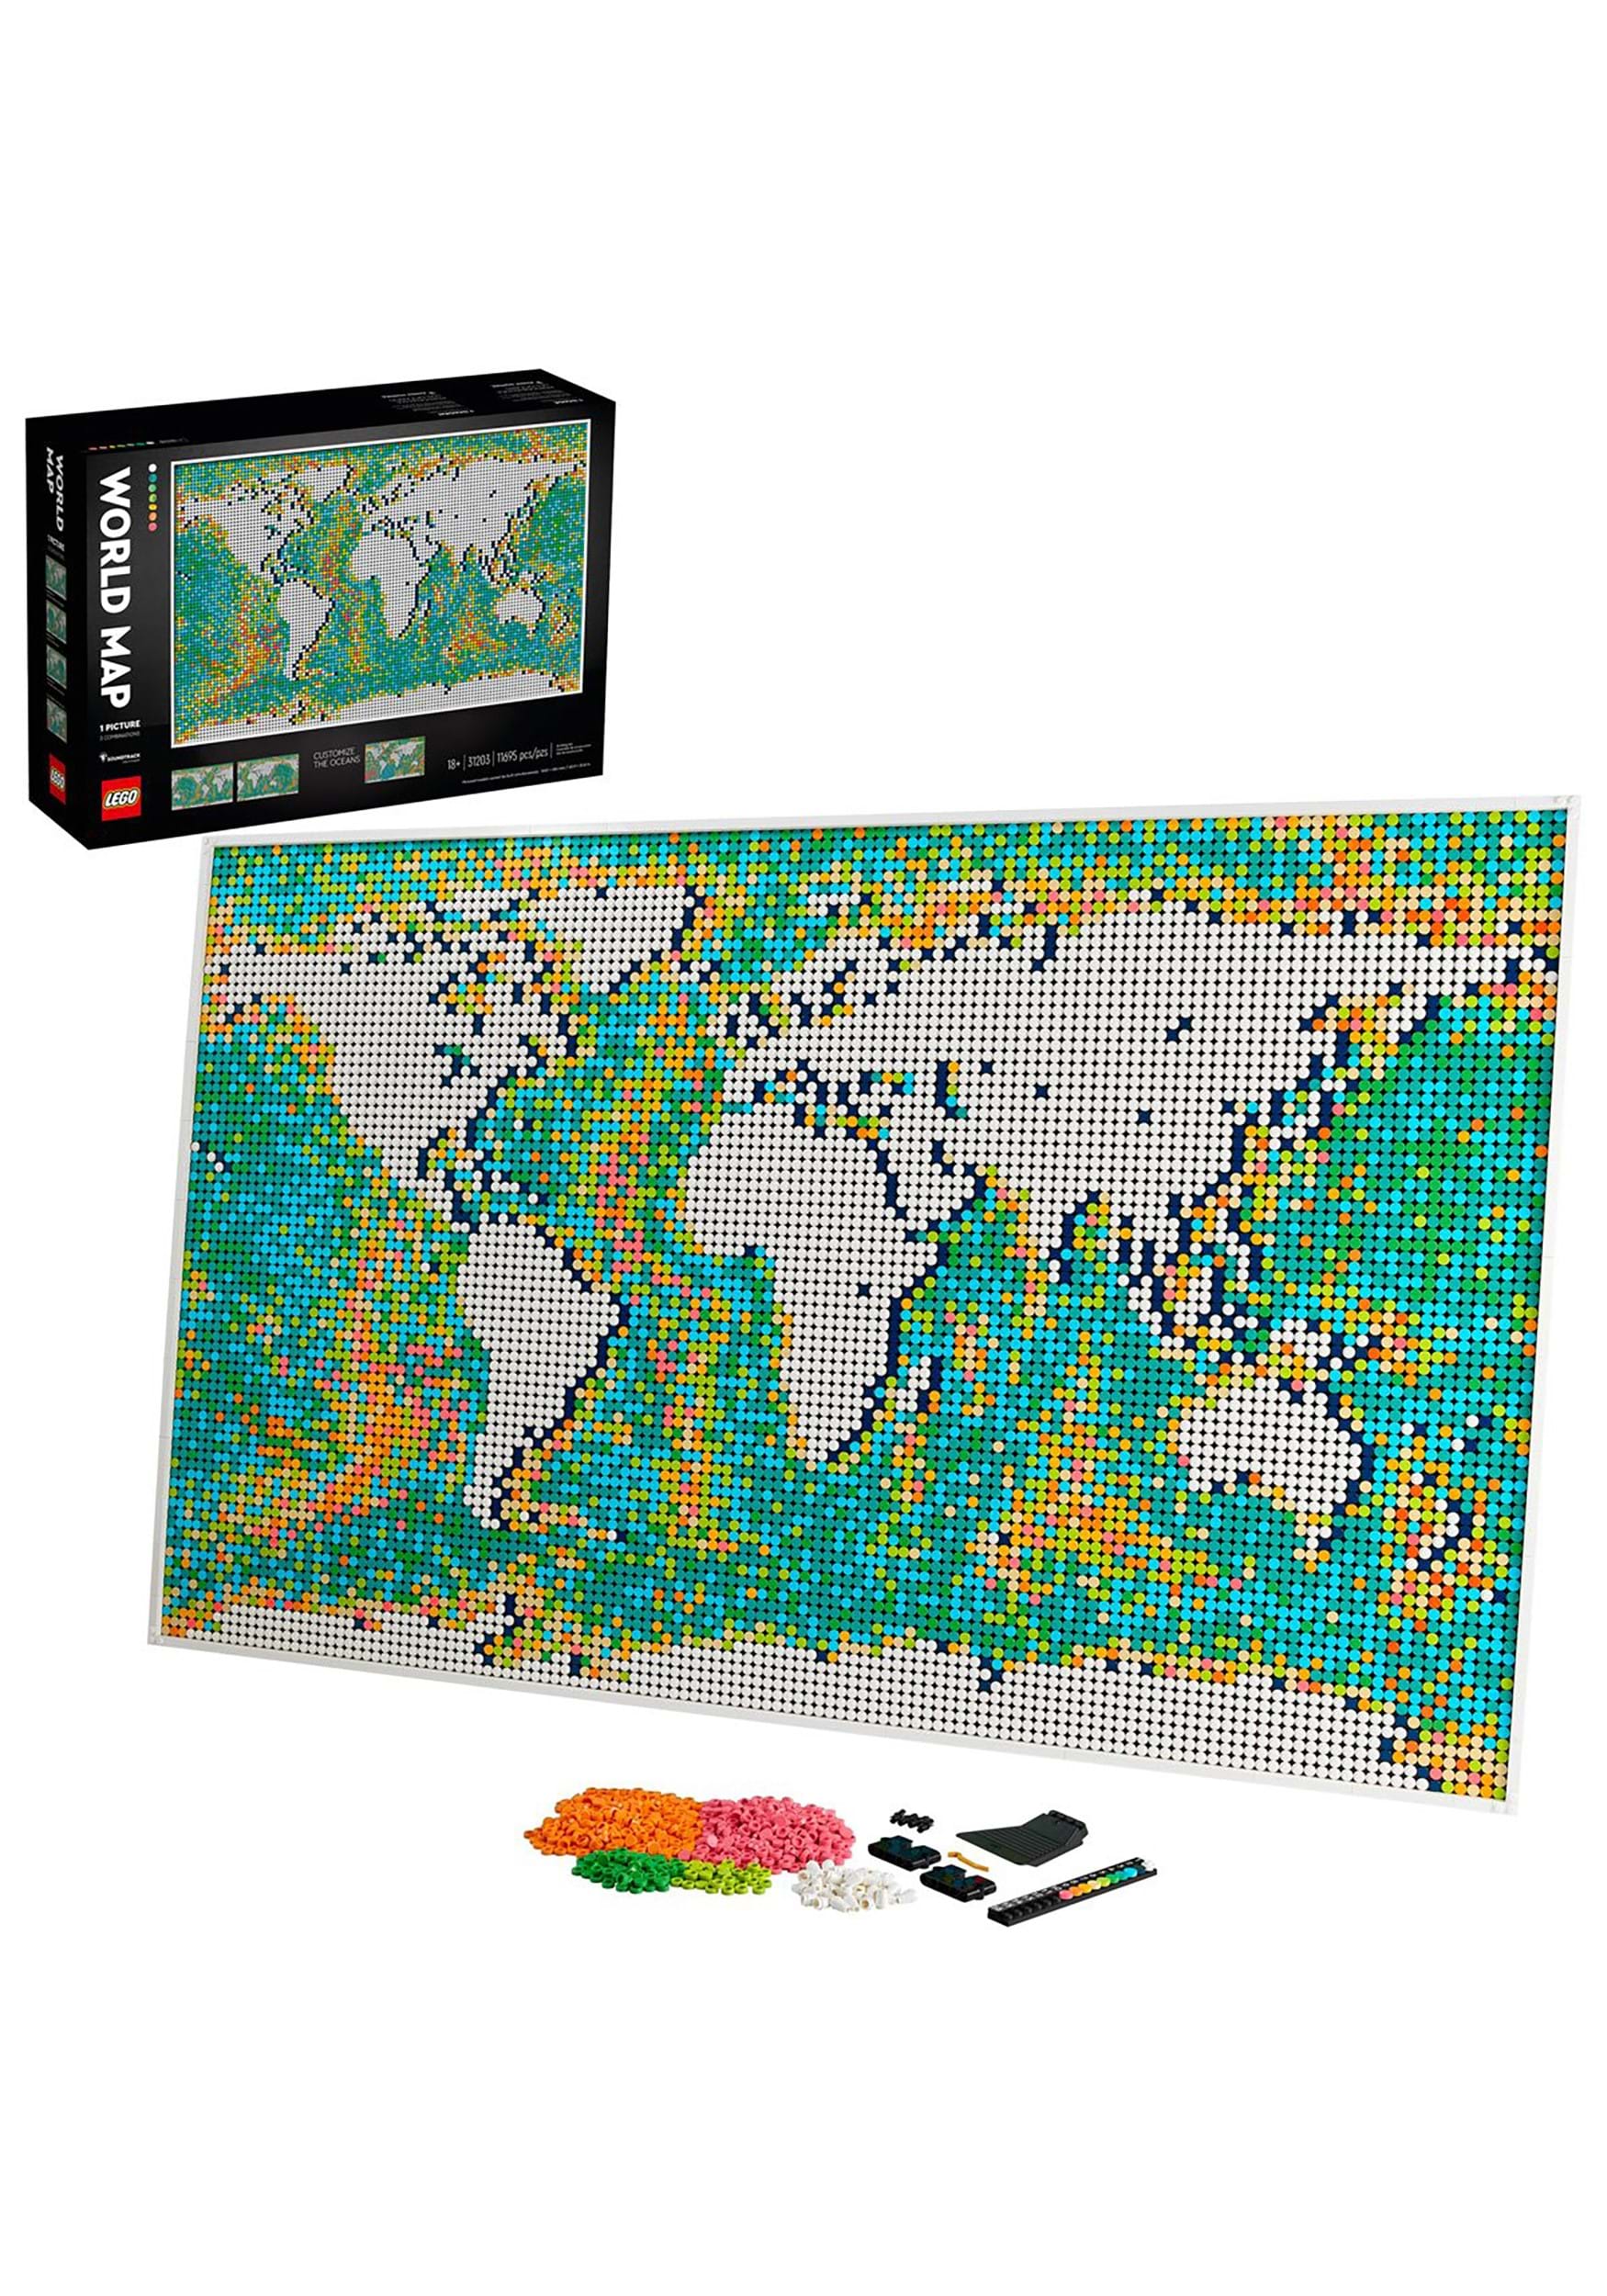 World Map from LEGO